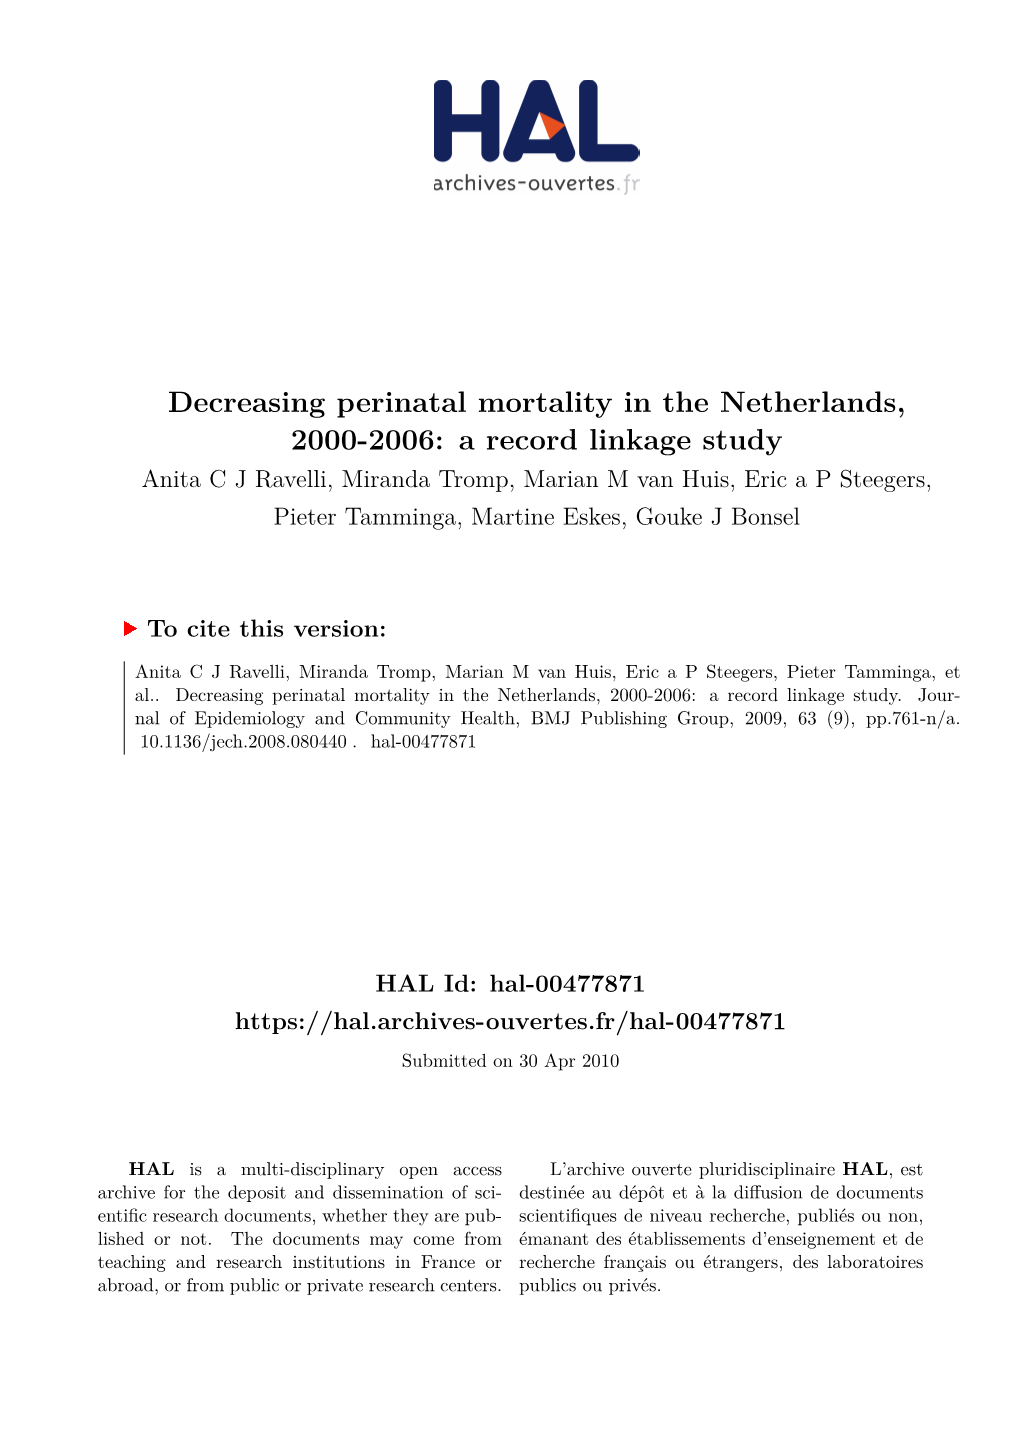 Decreasing Perinatal Mortality in the Netherlands, 2000-2006: a Record